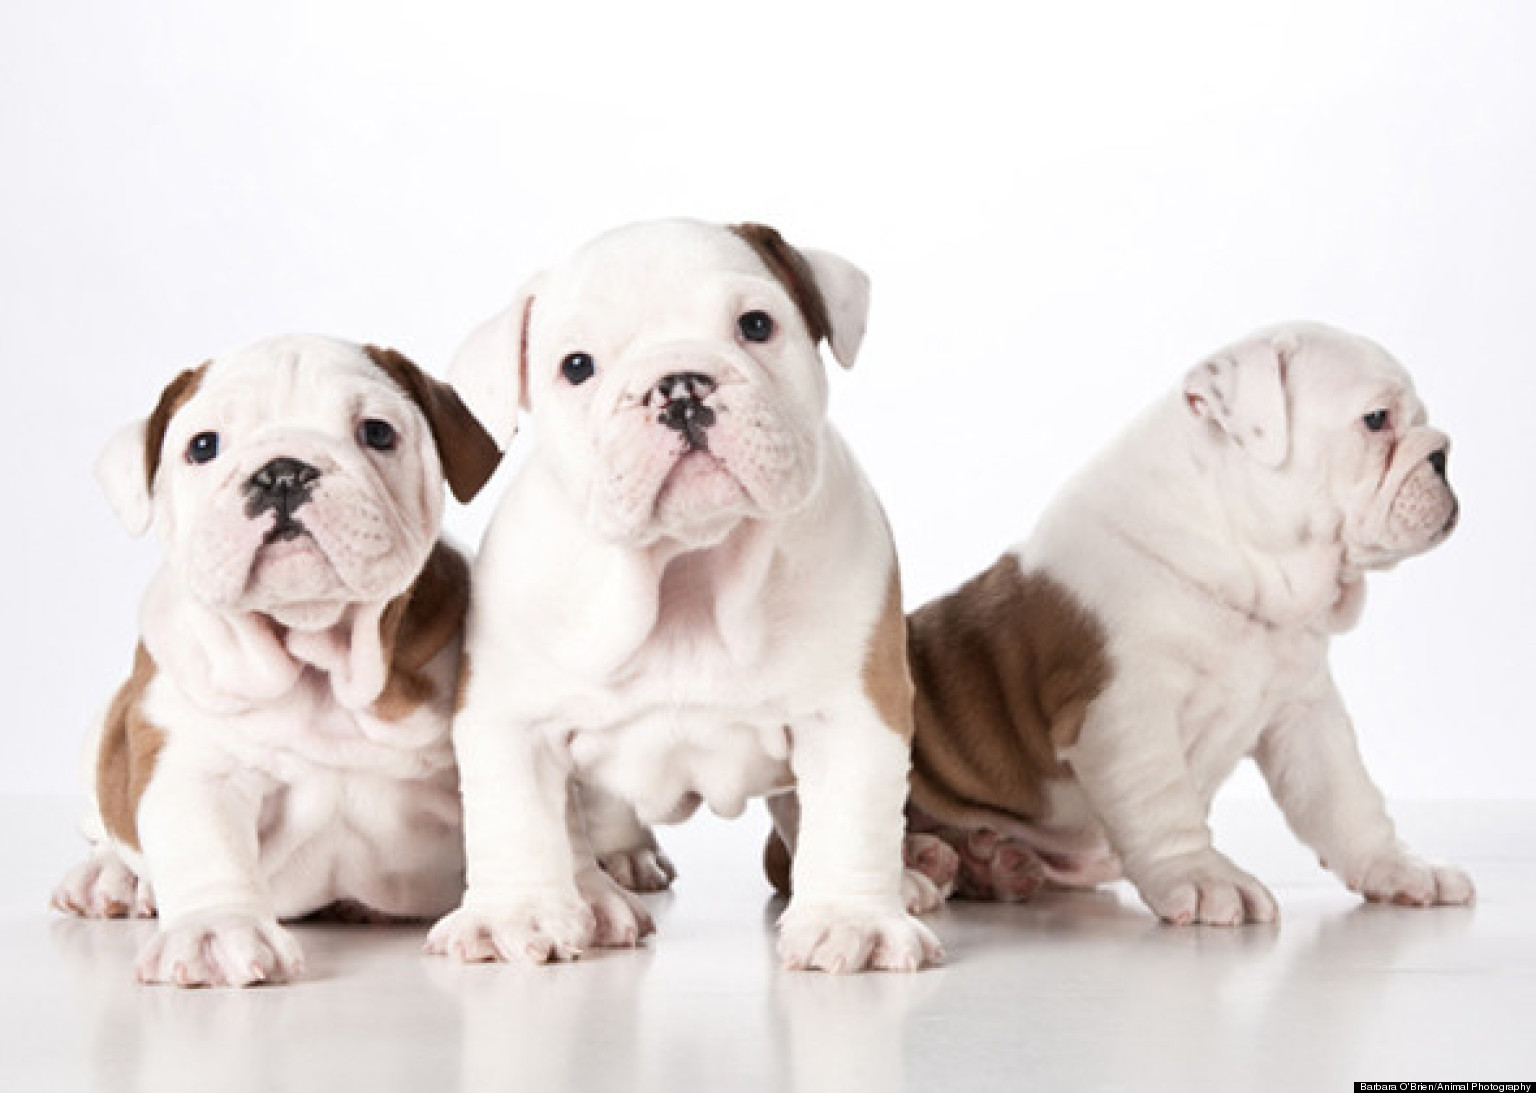 Wrinkly Dogs Make For Adorable Pets, But More Skin Calls For More Love ...